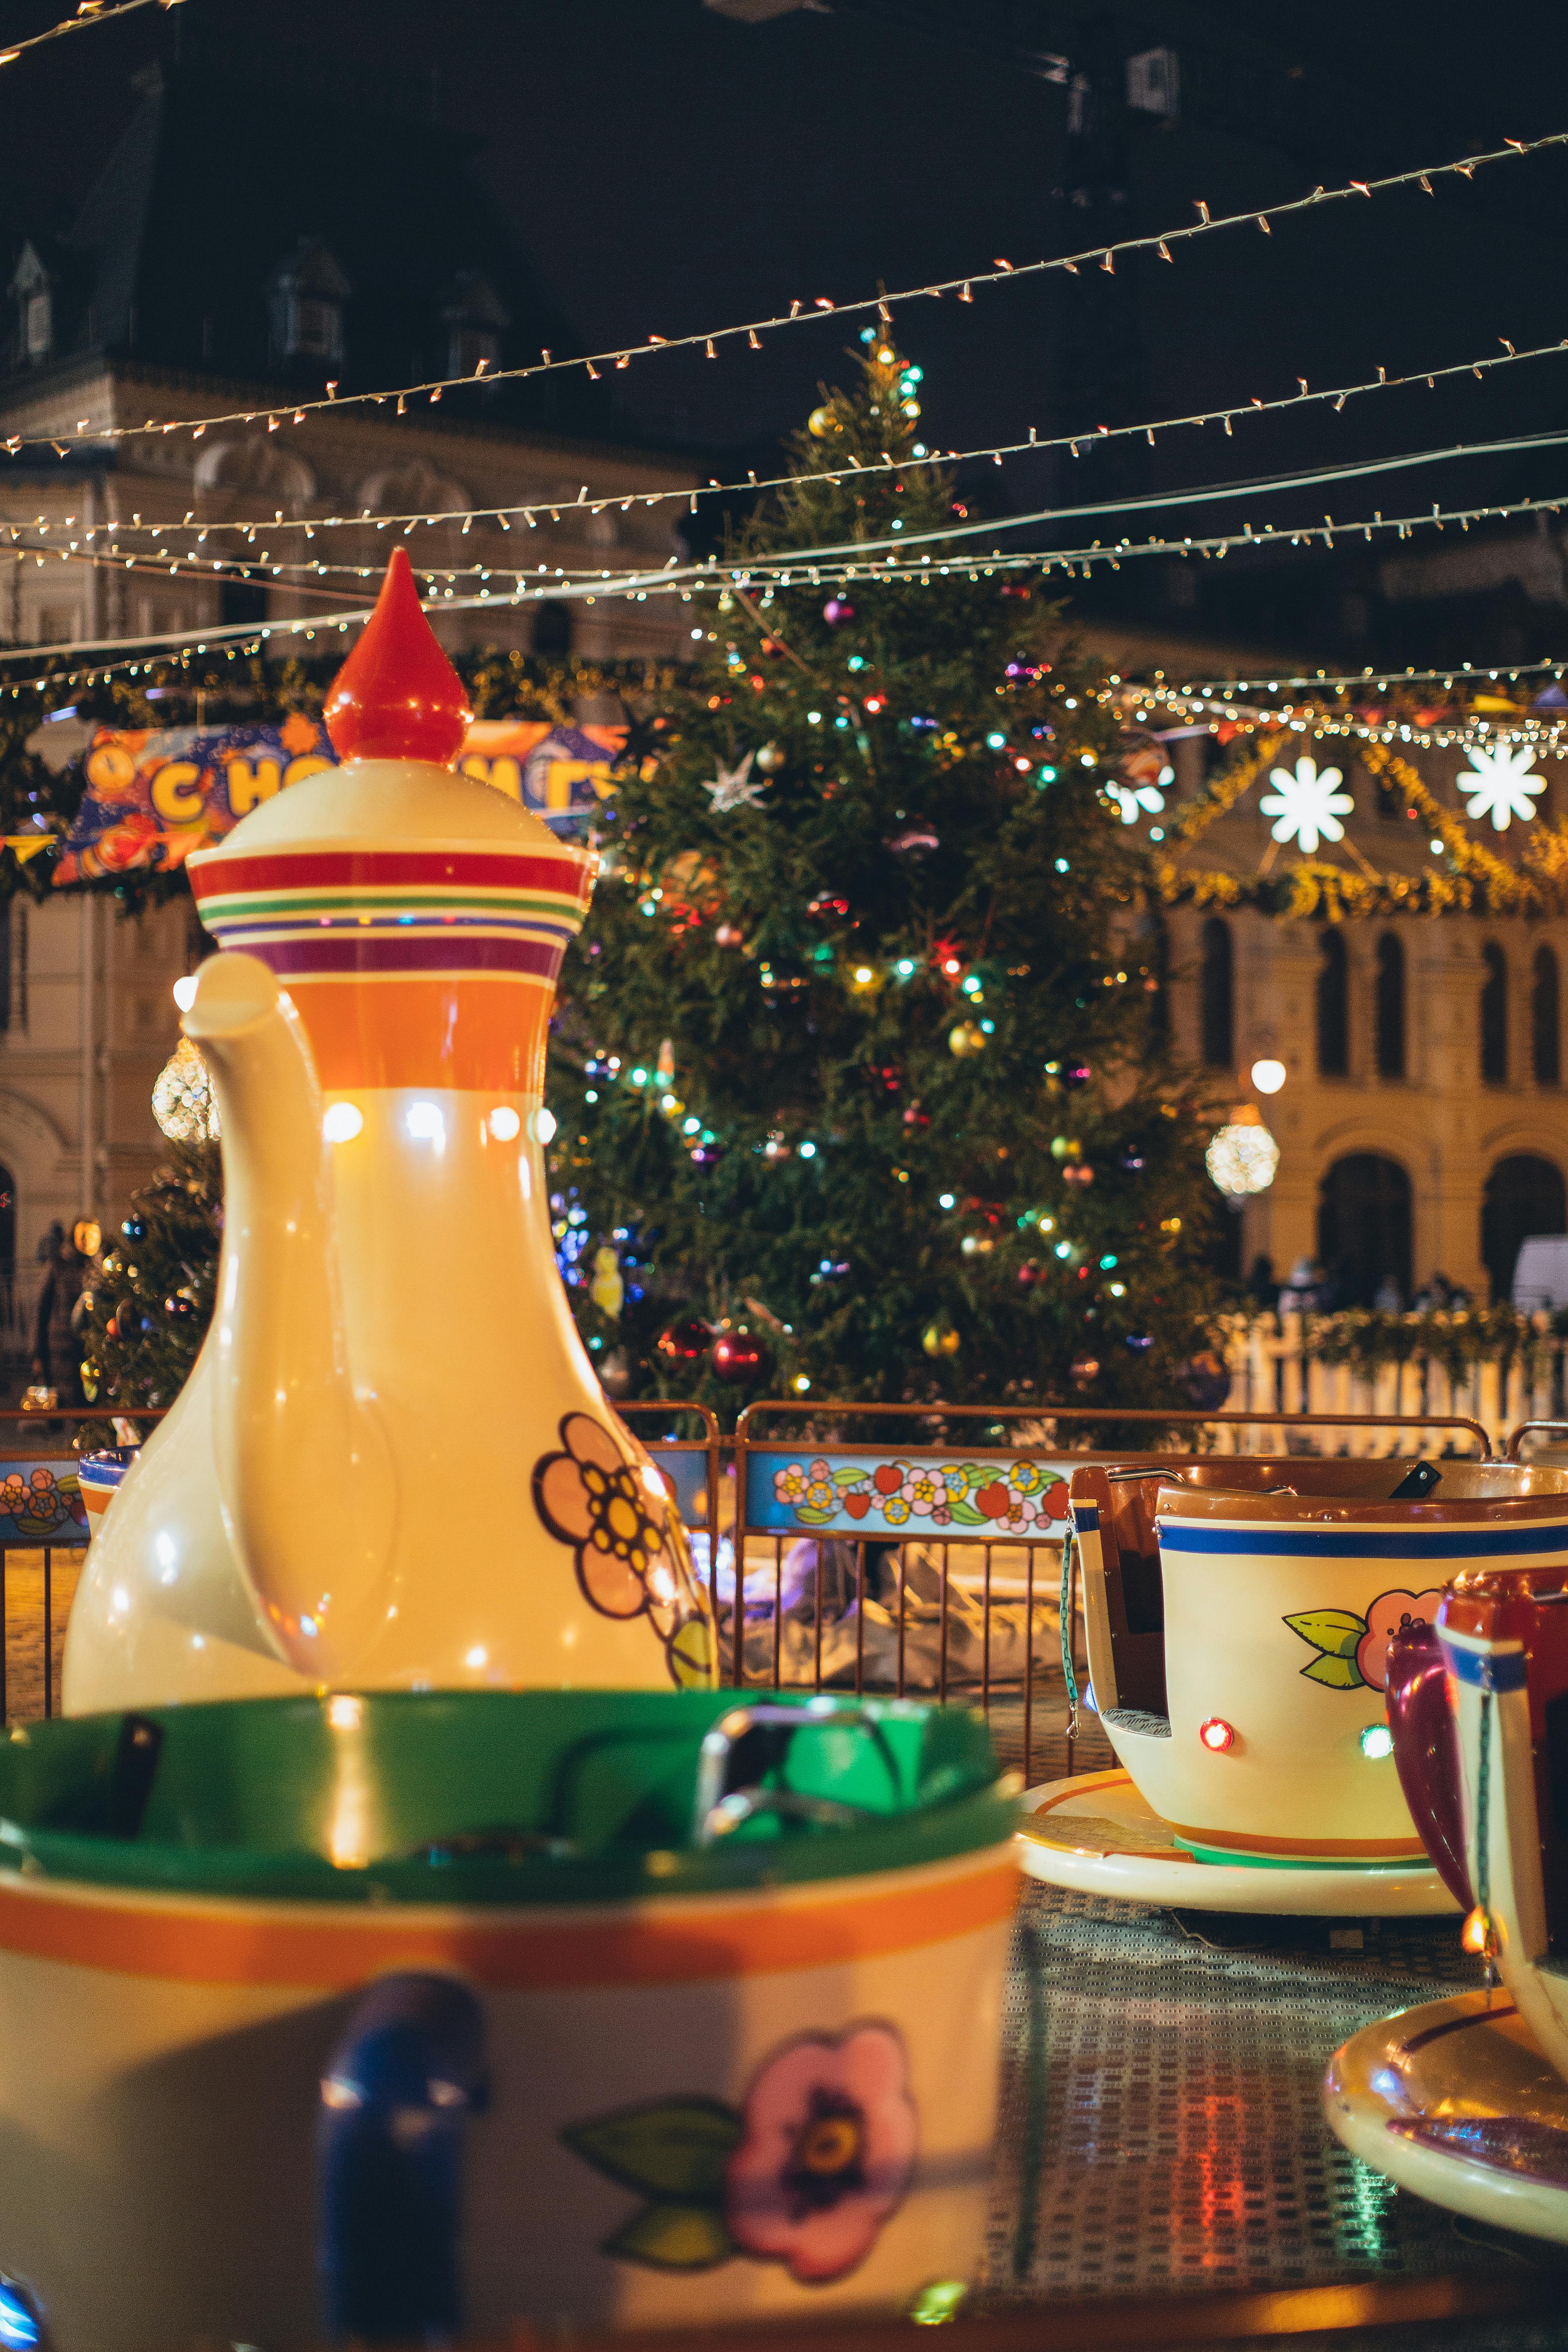 festive carousel with giant teapot and cups in park decorated in christmas style at night